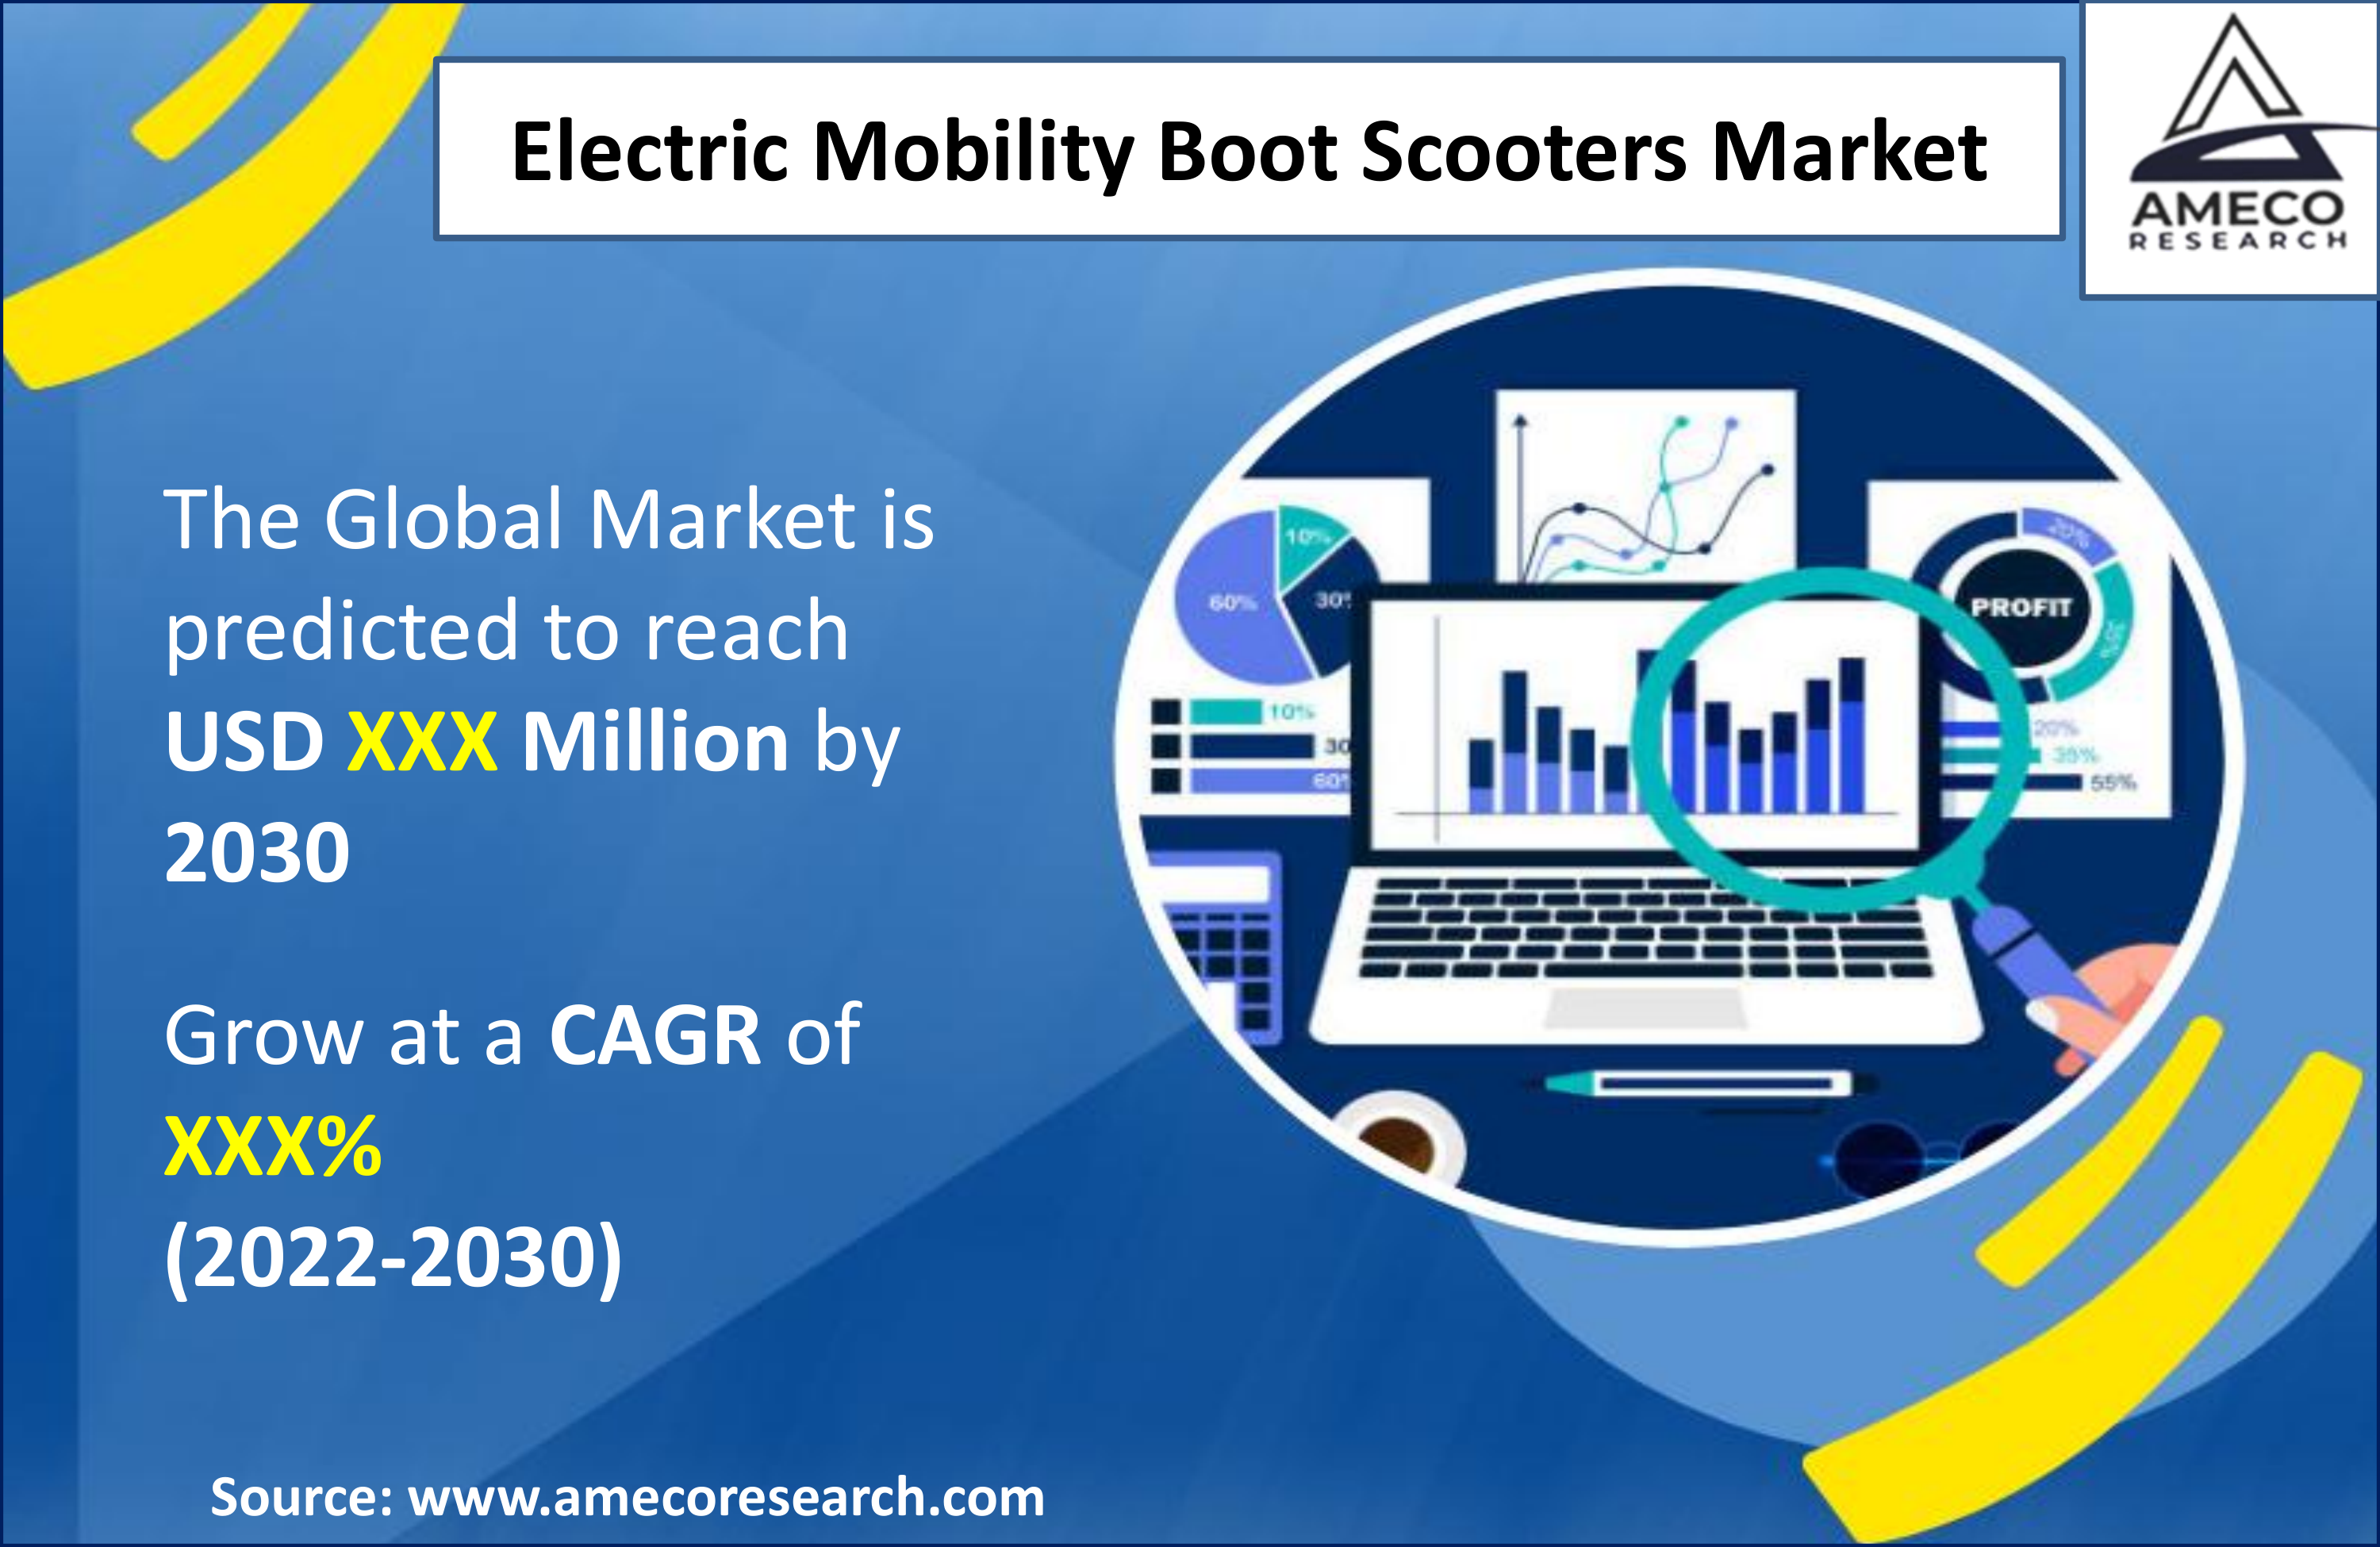 Electric Mobility Boot Scooters Market